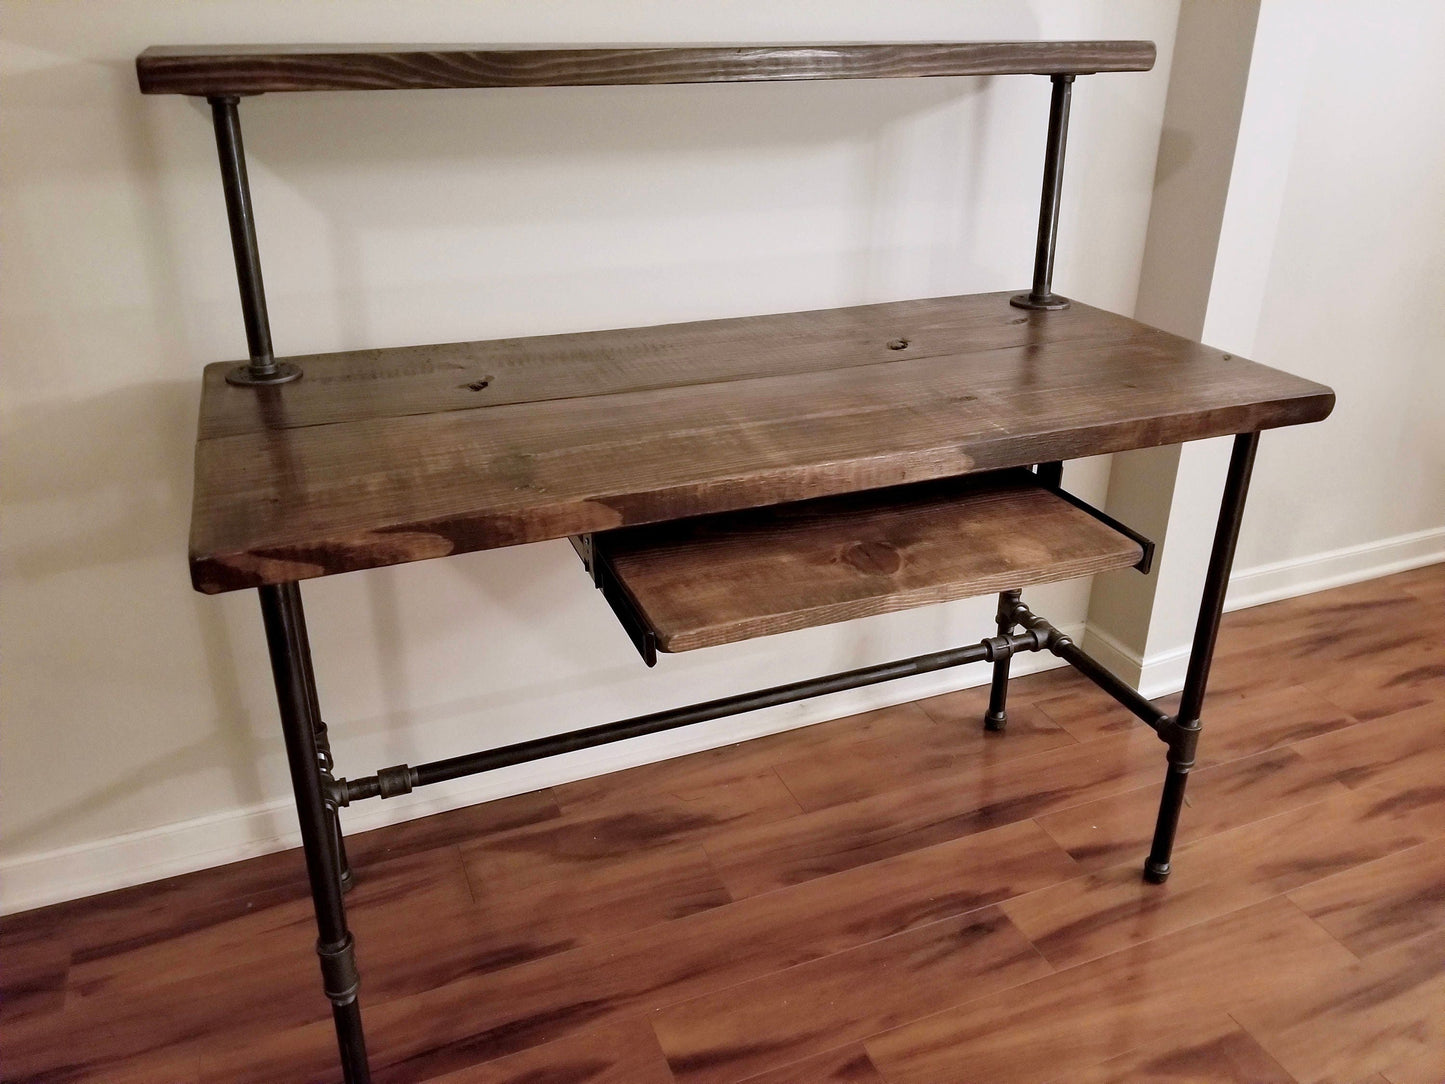 Steel and Wood Desk - Office Iron Pipe Desk with Monitor Shelf and Keyboard Tray - Shelf Height Options Listed in Description